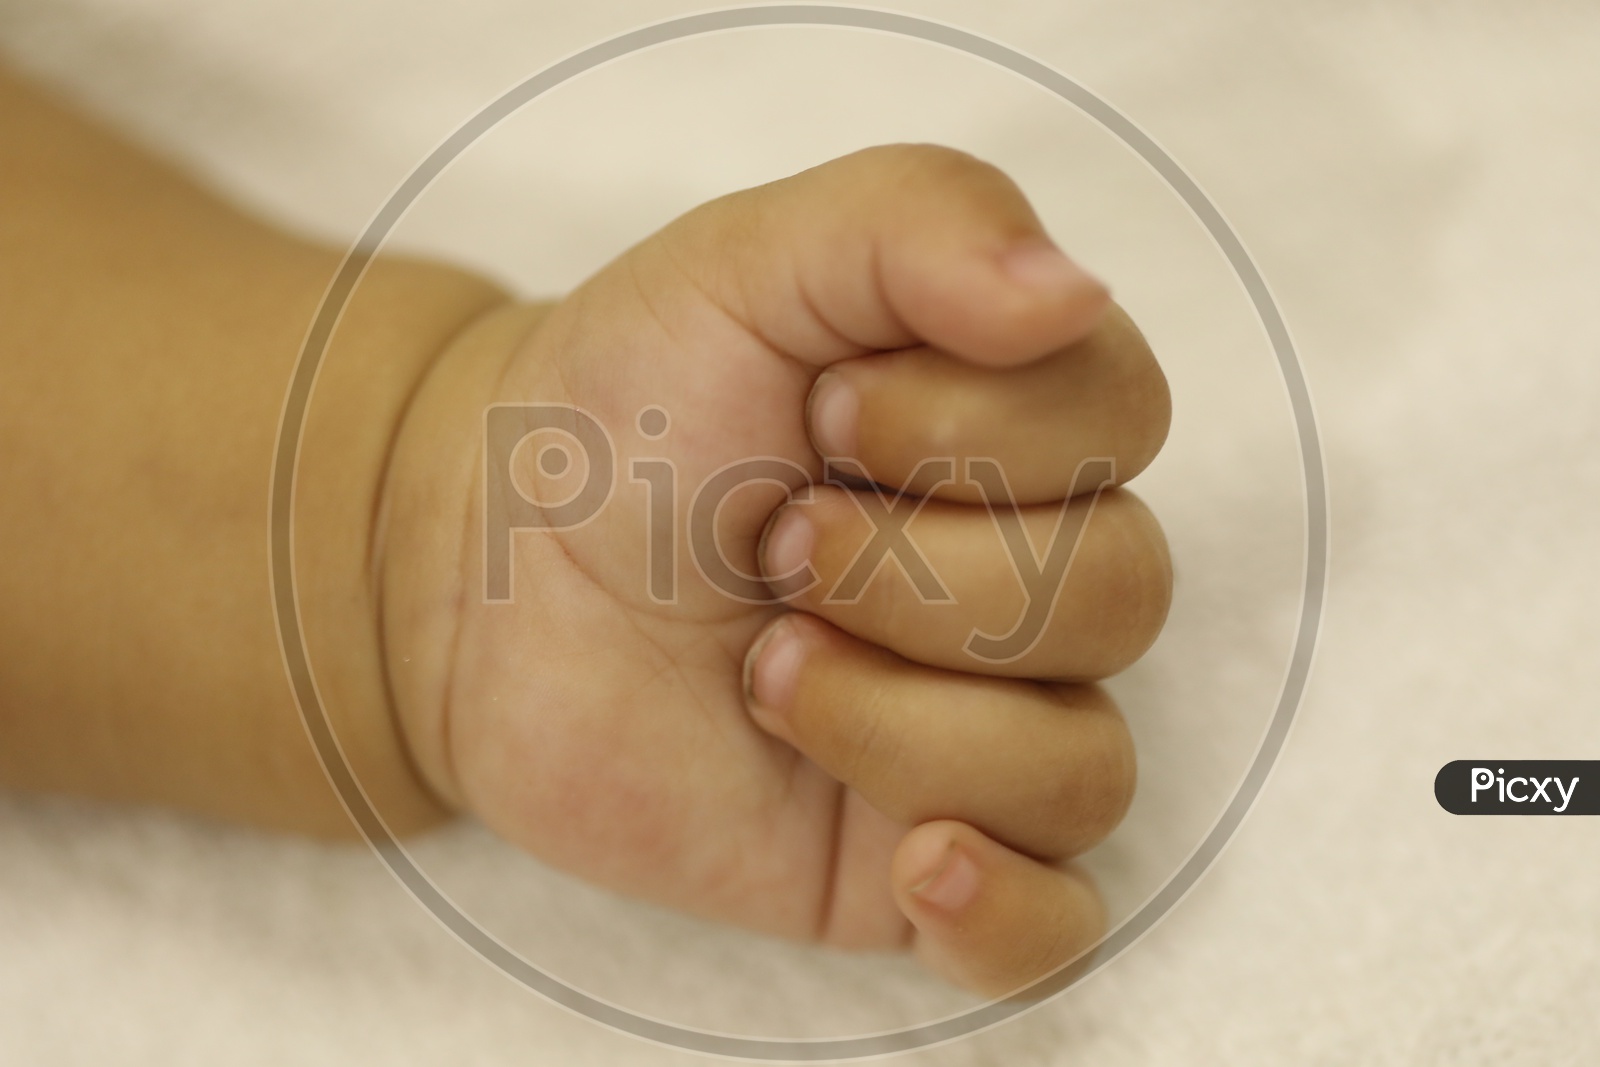 Closeup Shot of Little Baby Hand or Fingers